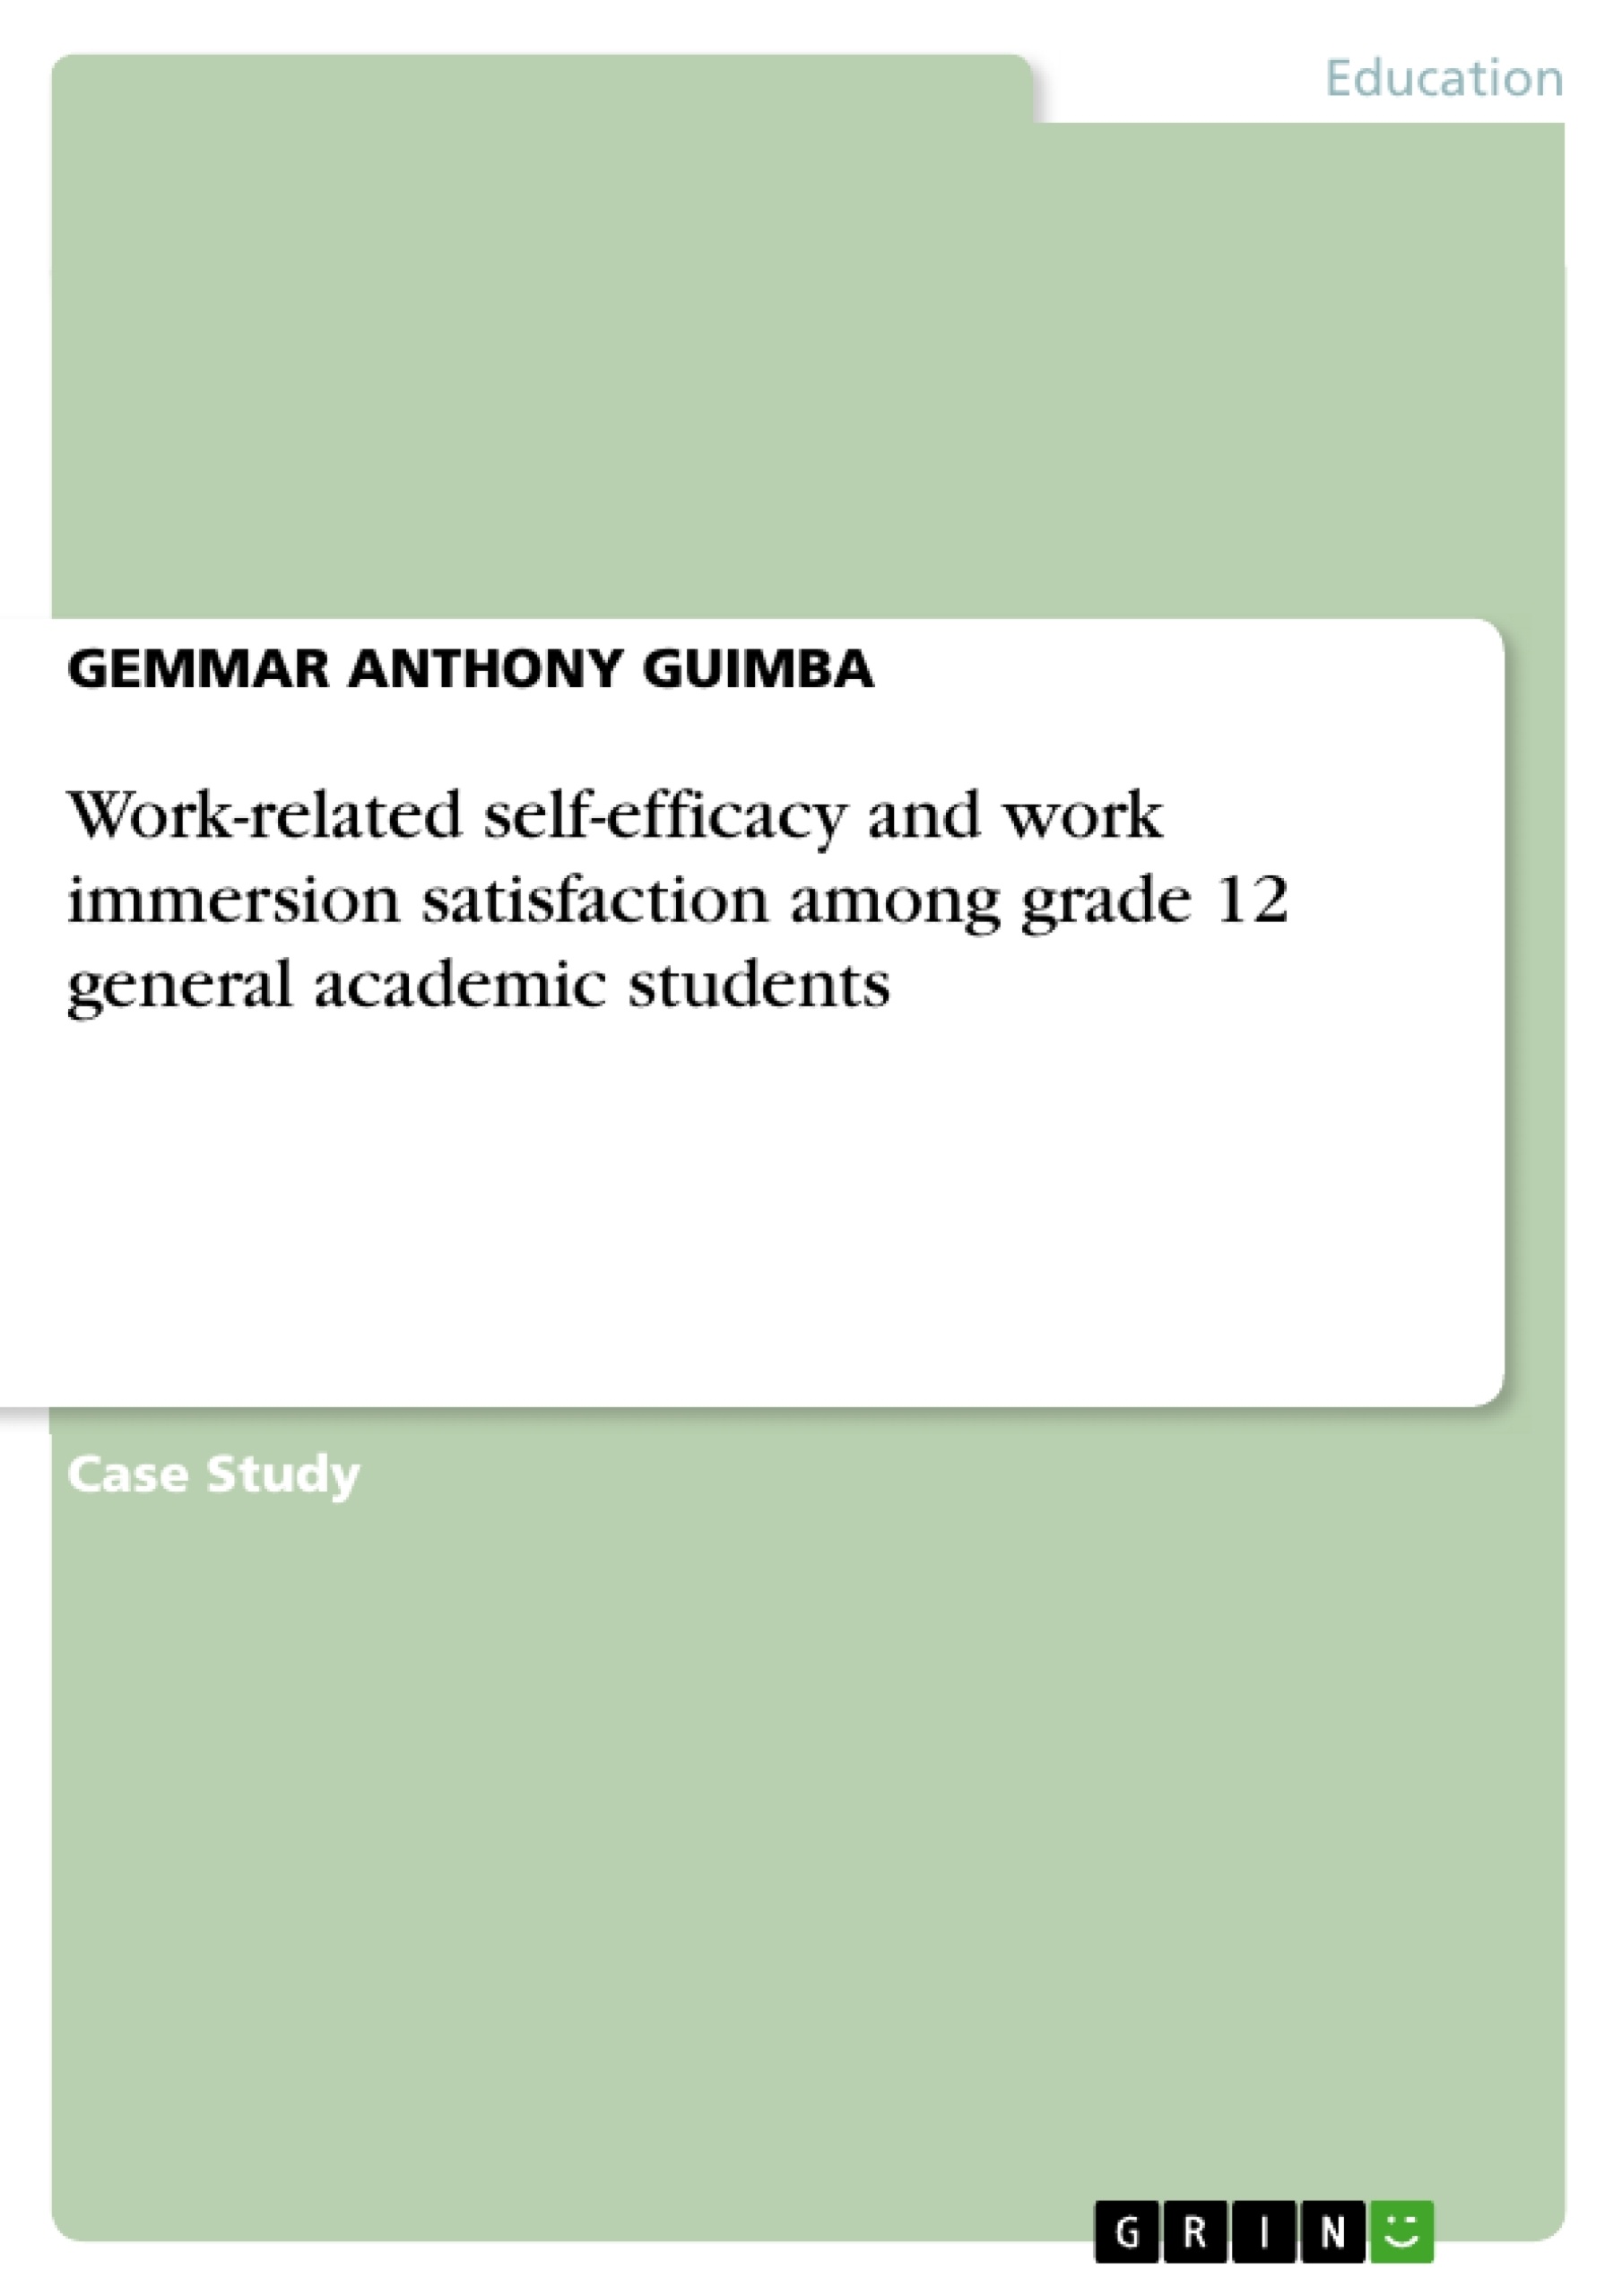 GRIN　12　satisfaction　academic　students　immersion　self-efficacy　work　grade　Work-related　general　and　among